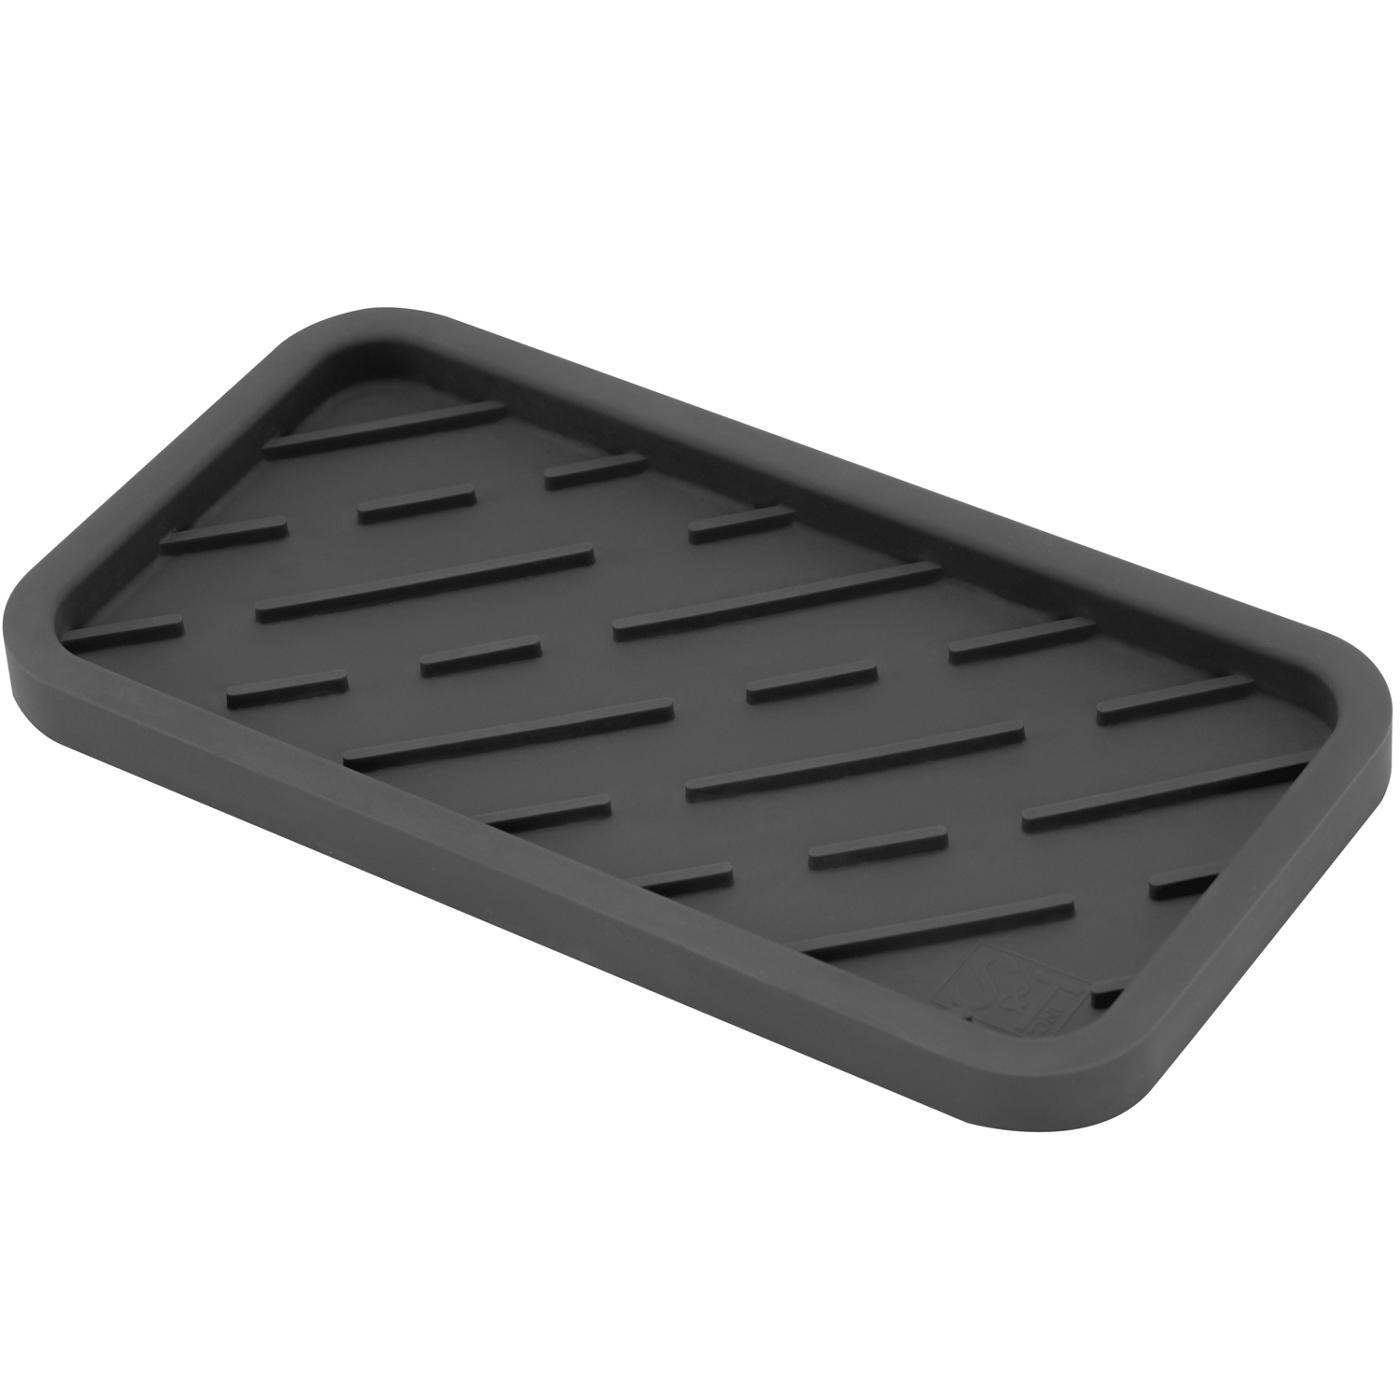 Schroeder & Tremayne Gray Silicone Sink Tray; image 1 of 2